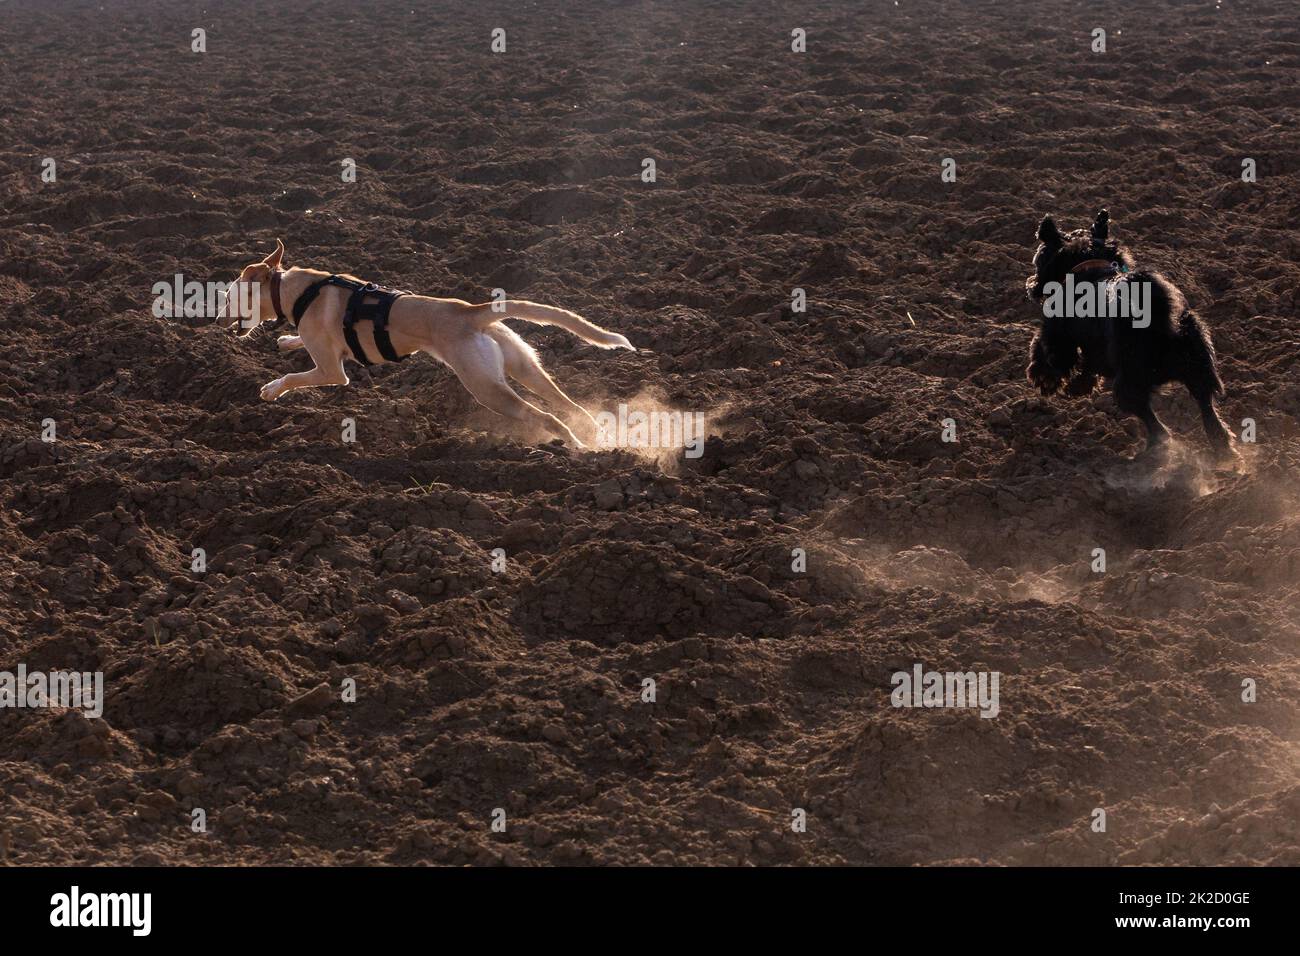 dogs running over a dusty field Stock Photo